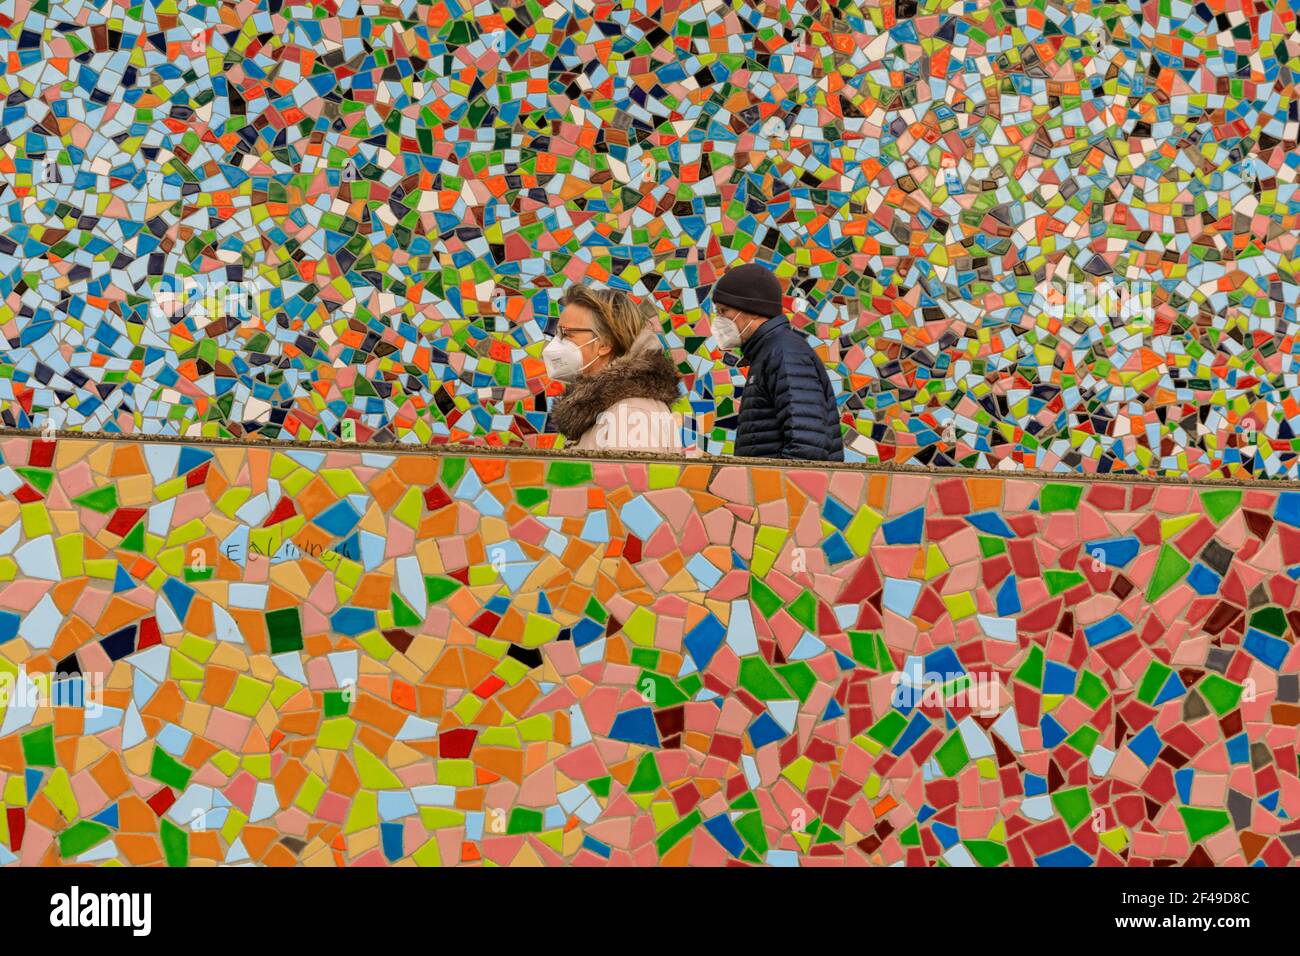 Dusseldorf, NRW, Germany. 19th Mar, 2021. Two people in FFP2/KN95 face masks walk past the 'Rivertime' mosaic wall by Hermann-Josef Kuhna on the banks of the river Rhine in Dusseldorf, capital of NRW. Lockdown measures are likely to once again increase in Germany as the 7-day incidence rate creeps up towards the crucial cut-off point of 100/100k inhabitants. Whilst Dusseldorf fares relatively well at 63 today, Germany overall saw numbers rise to 95.6 Credit: Imageplotter/Alamy Live News Stock Photo